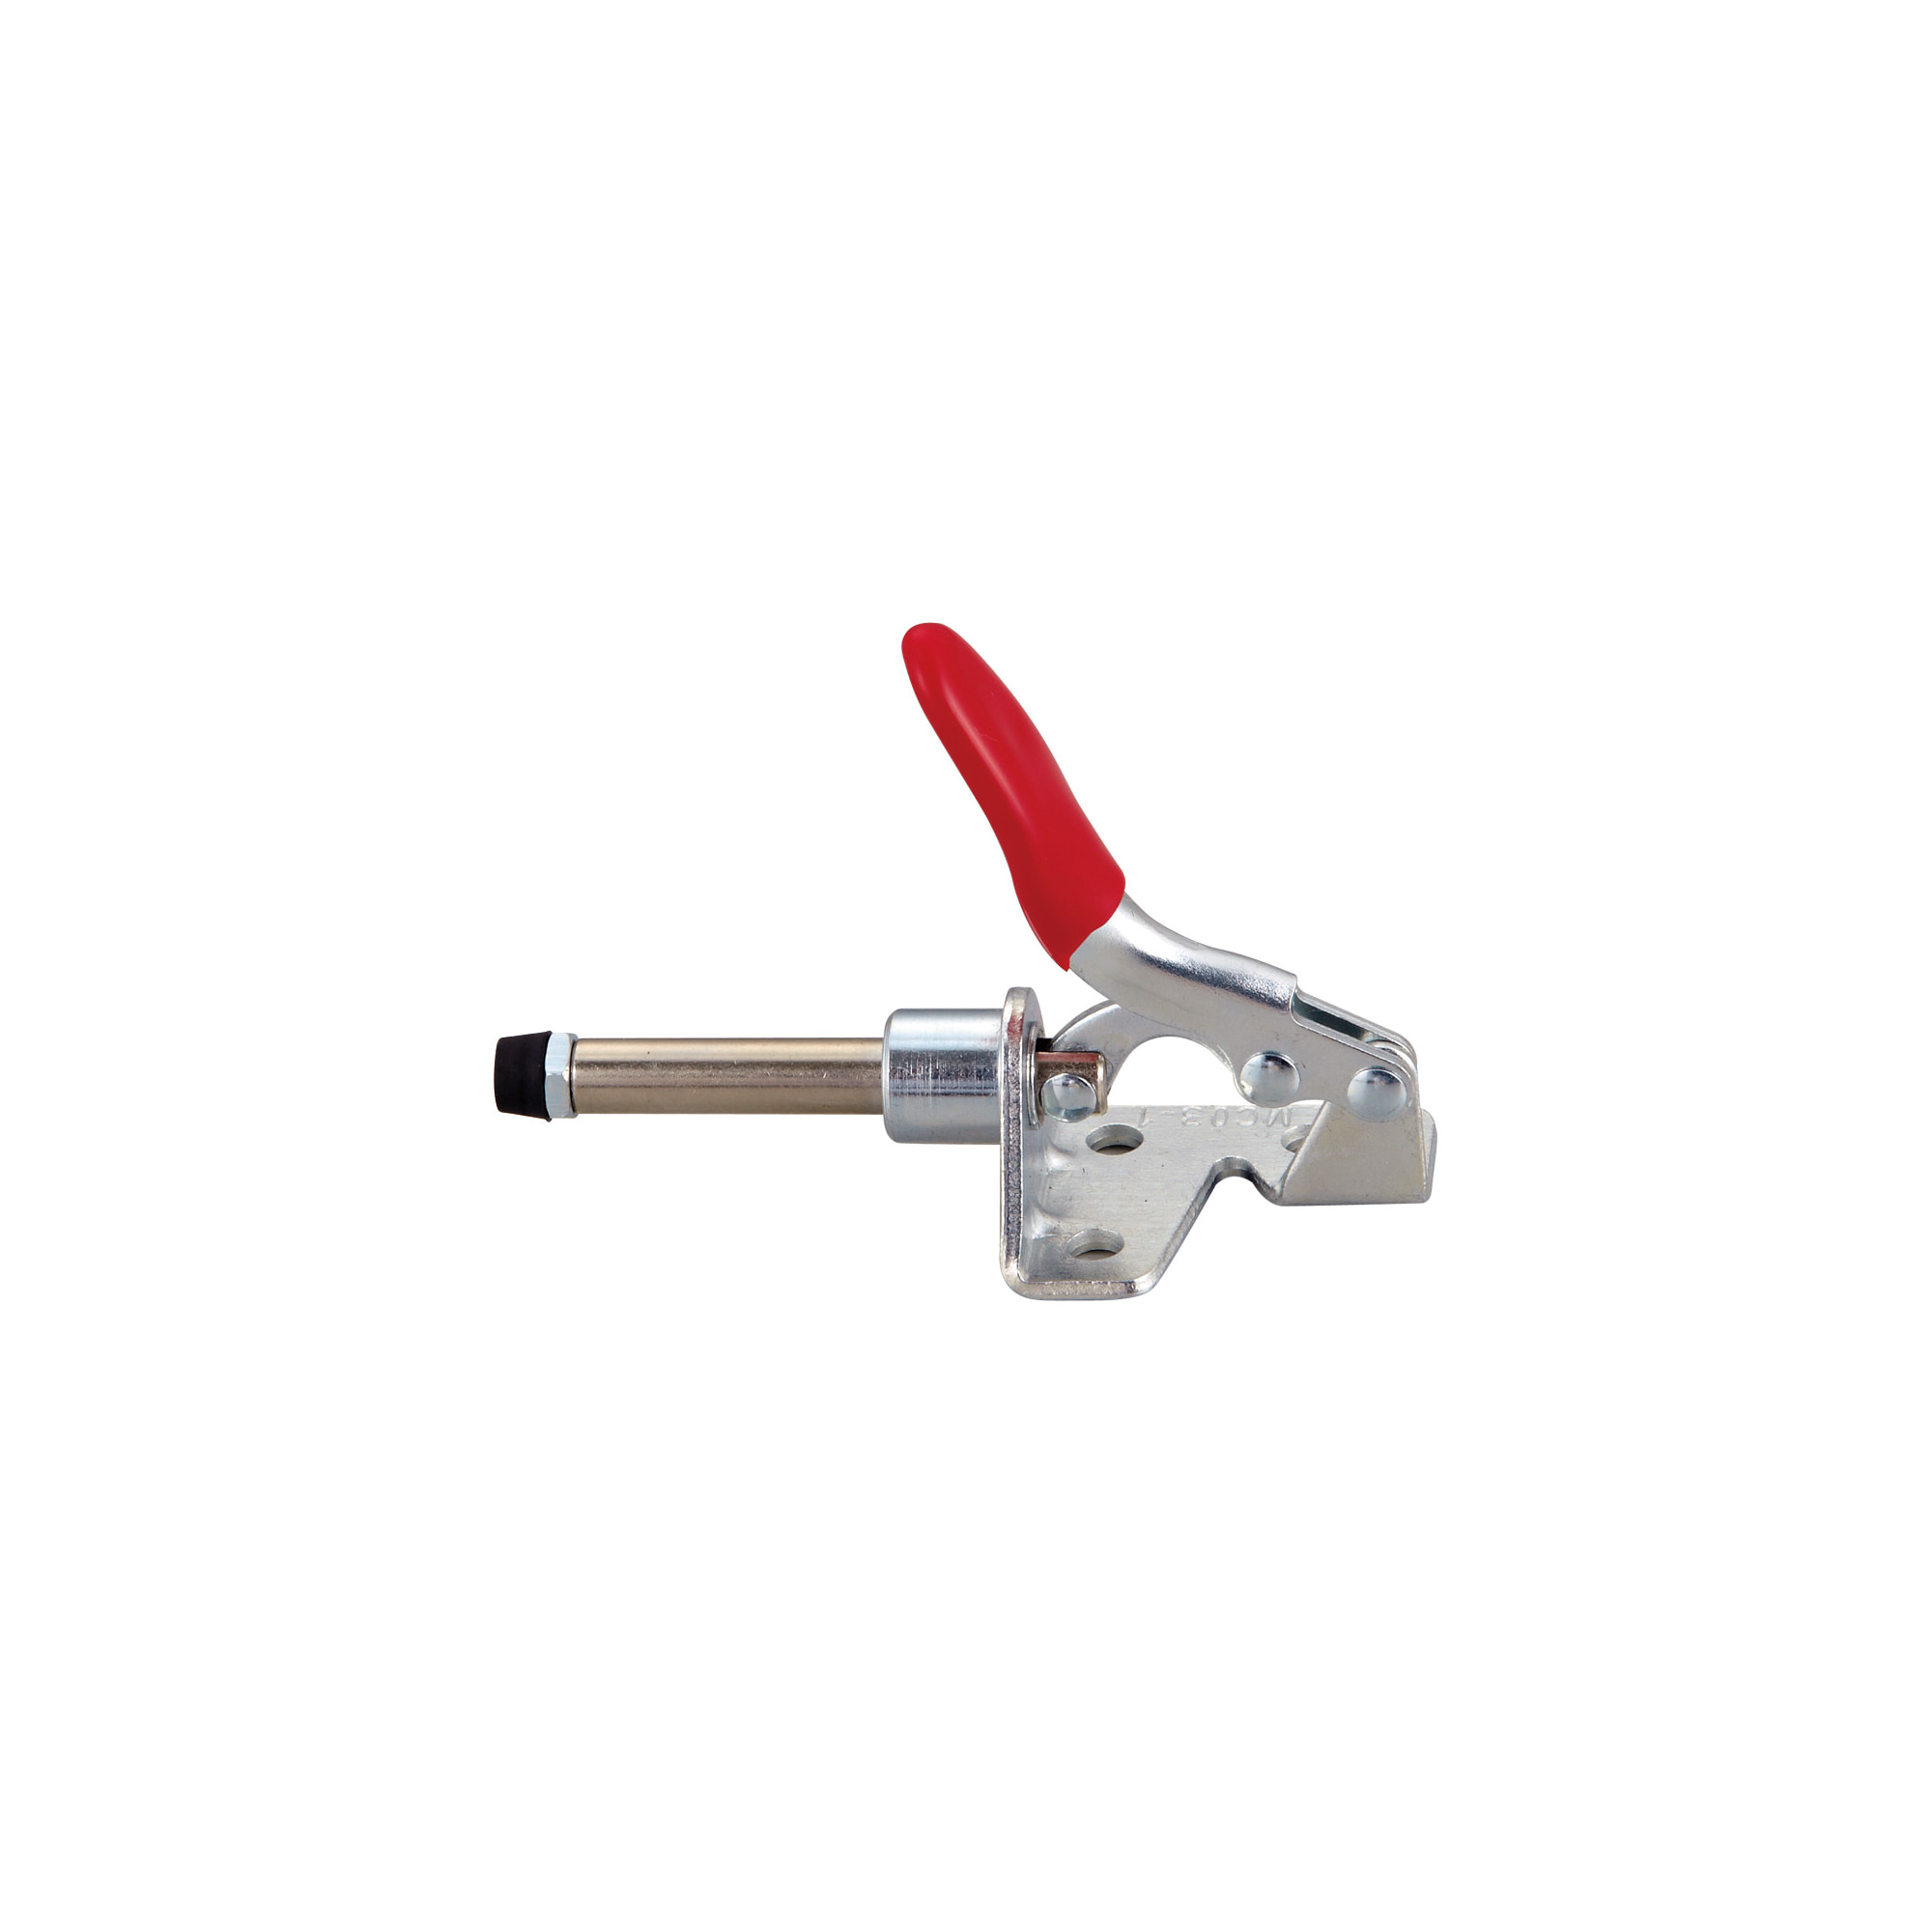 Toggle Clamp Holding Capacity & Clamping Force